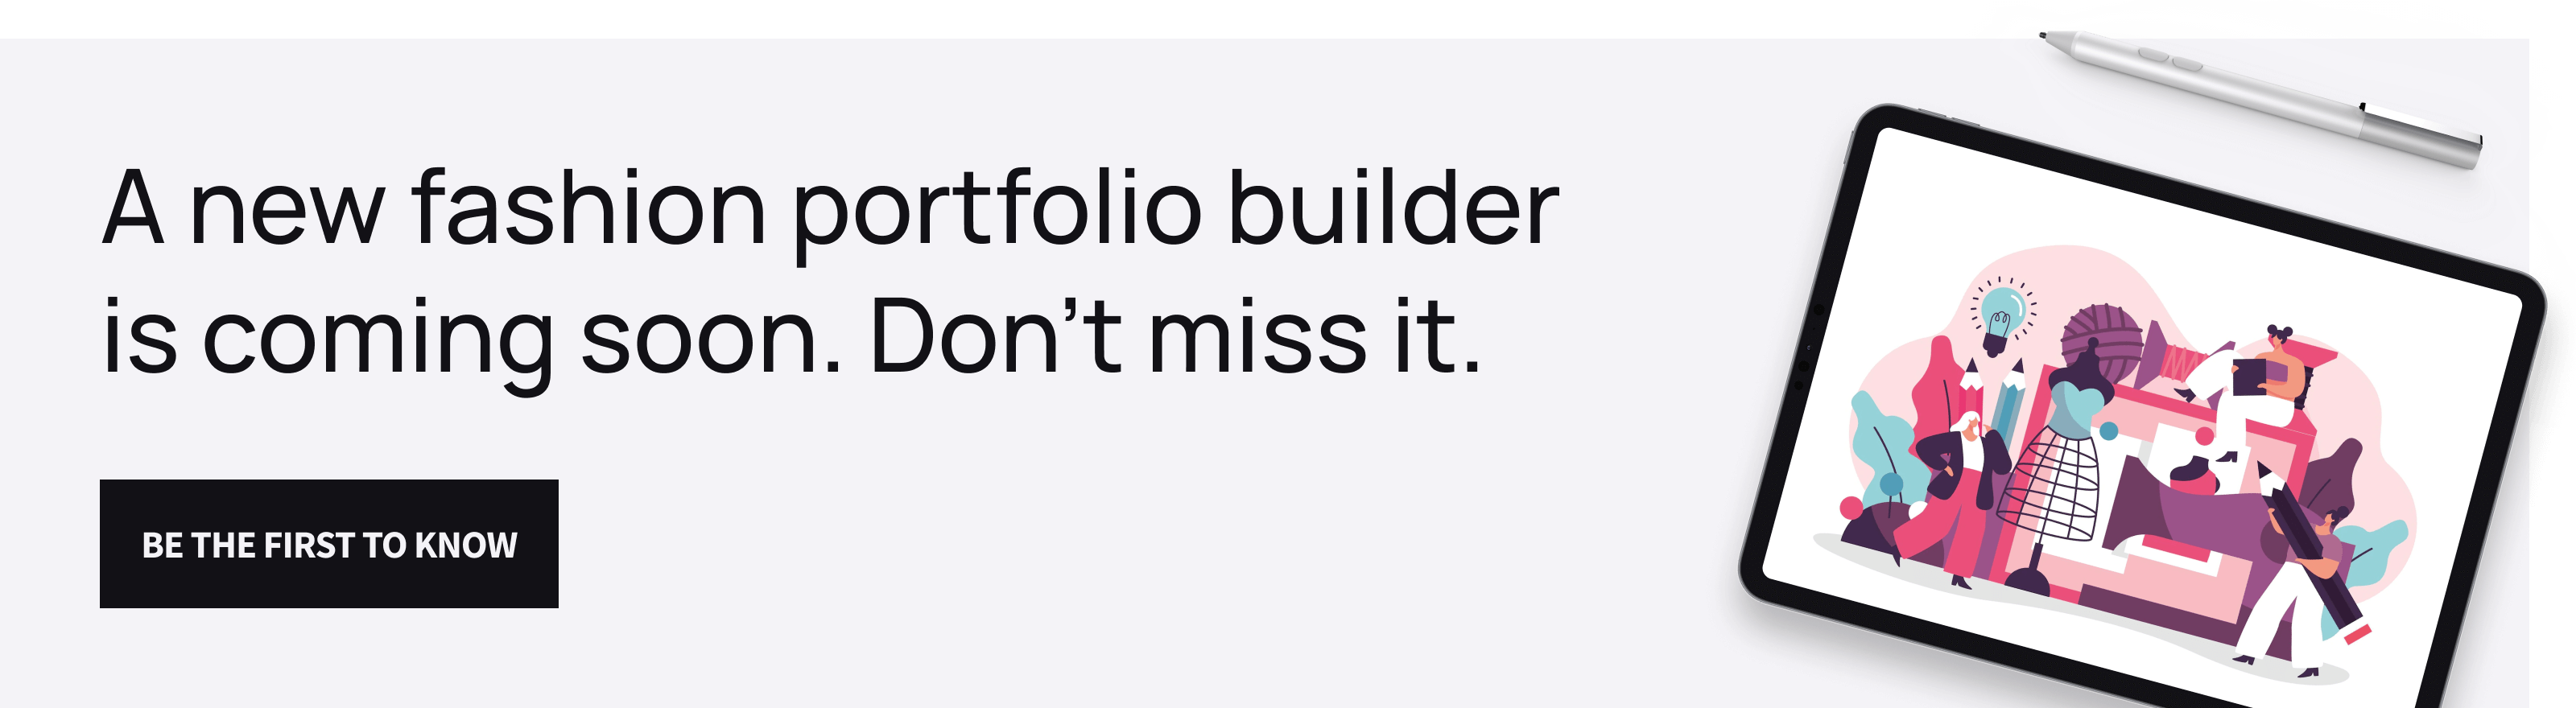 A banner saying "A new fashion portfolio builder is coming soon. Don't miss it."